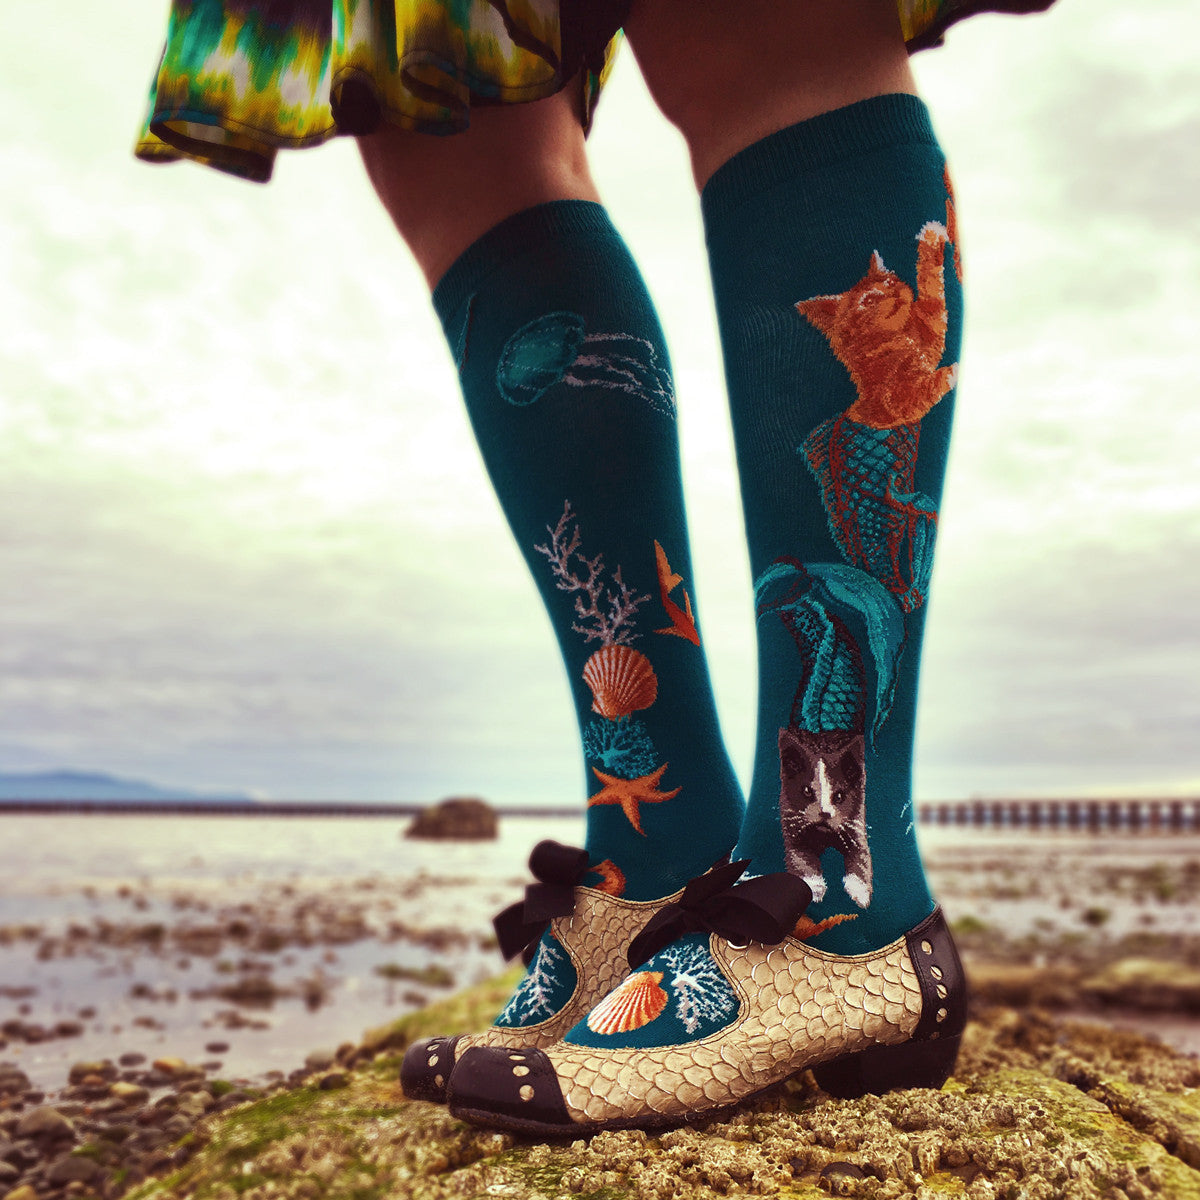 Purrmaids are part mermaid, part cat and 100% adorable as shown on ModSocks' ocean-themed deep teal knee socks, worn here with fish-scale spectator pumps.